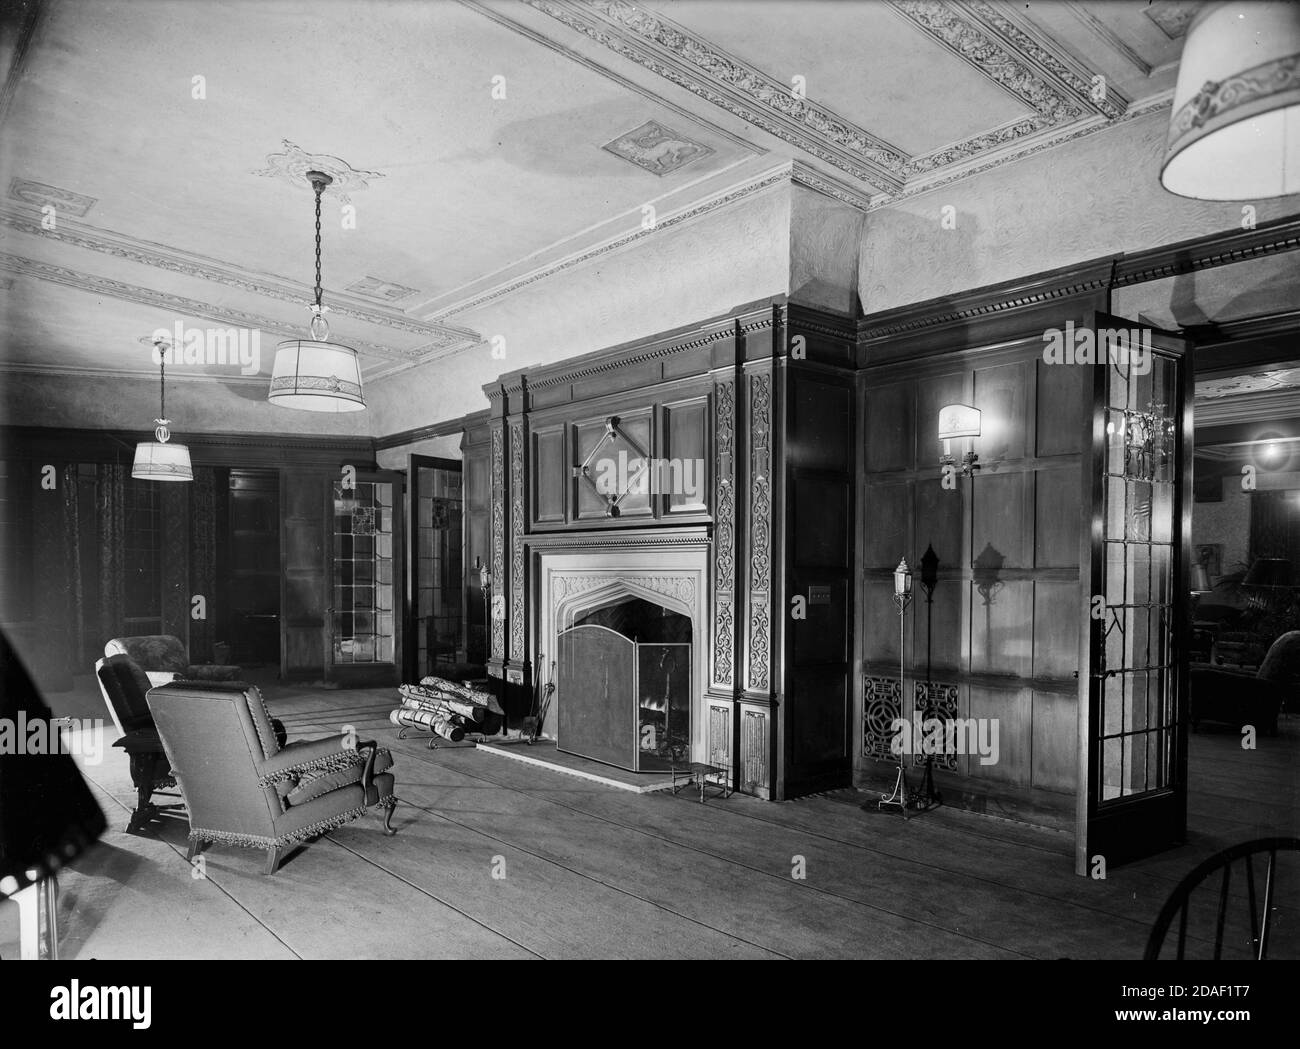 Library fireplace and mantel in Furniture Club of America, architect Max Dunning, Chicago, Illinois, circa 1923-1936. Stock Photo